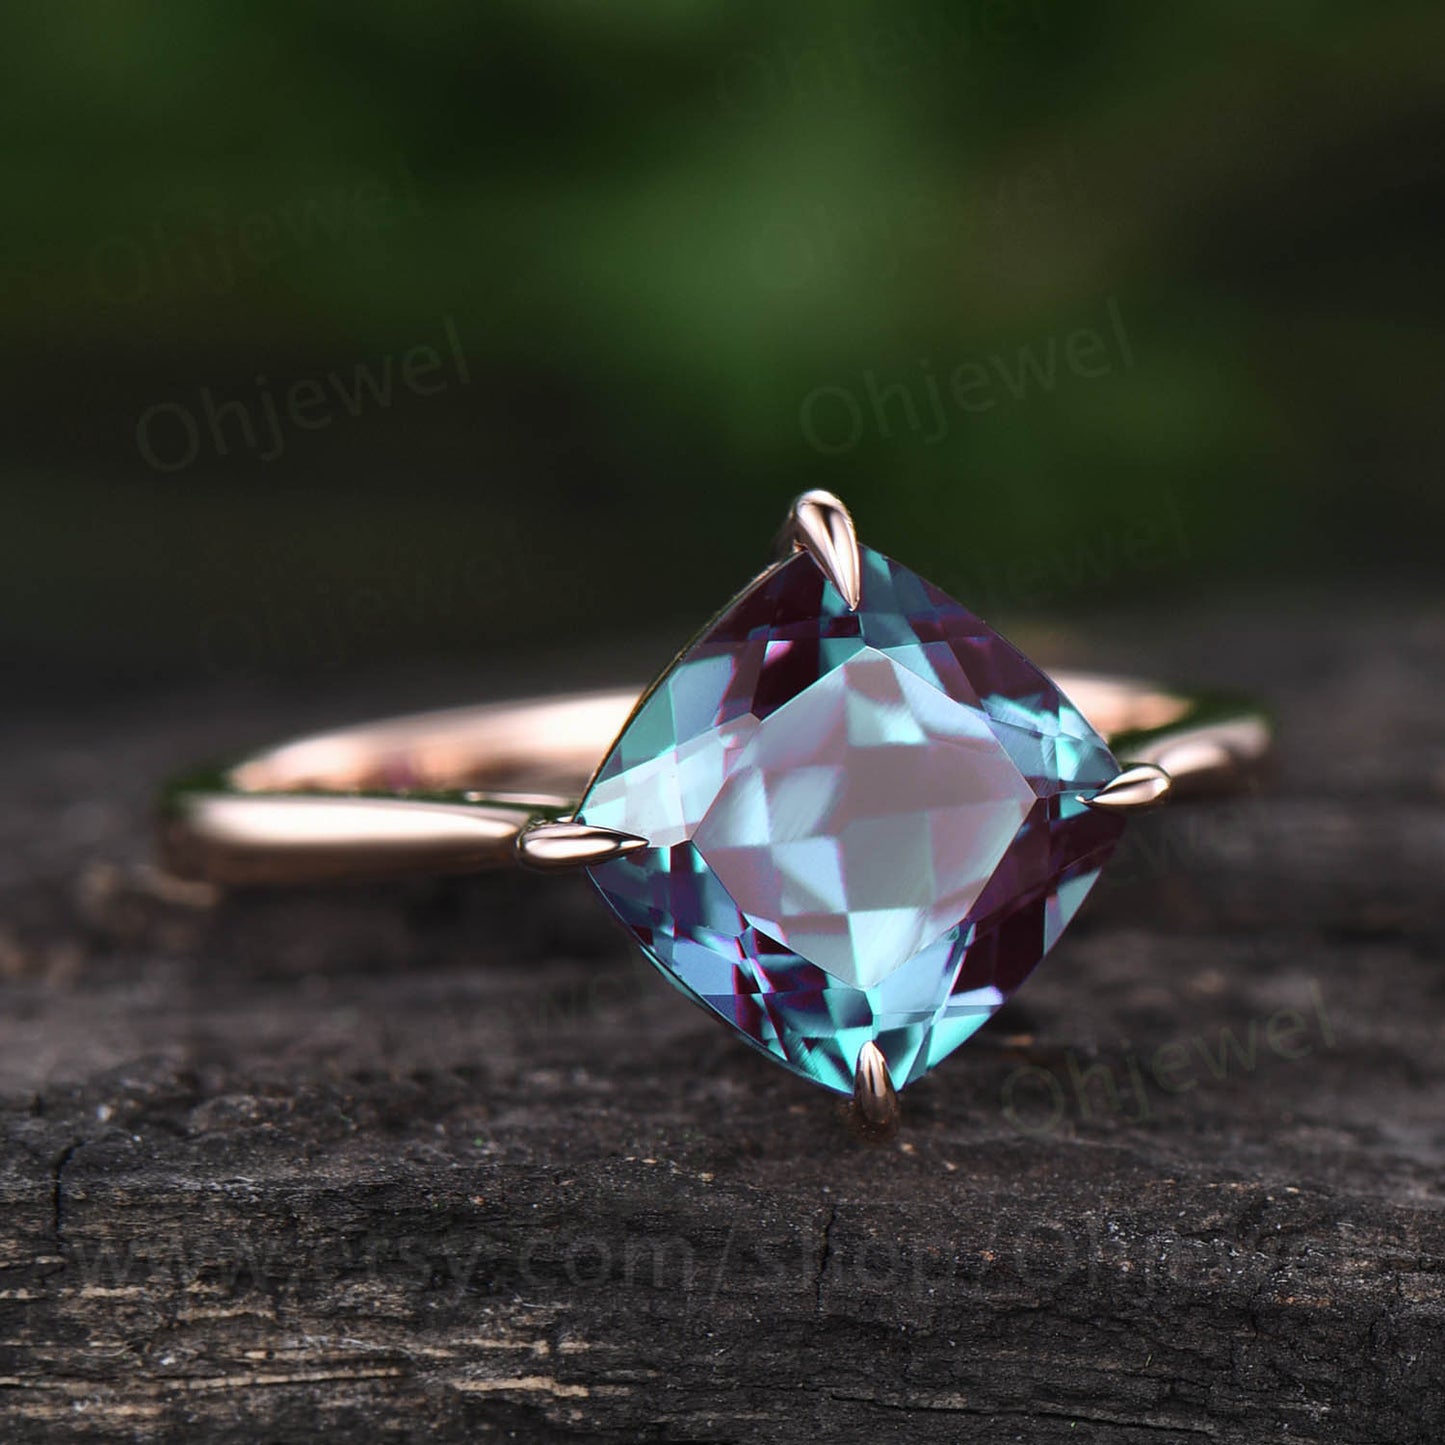 Cushion cut alexandrite engagement ring vintage Solitaire rose gold color change stone ring for women custom jewelry wedding bridal gift